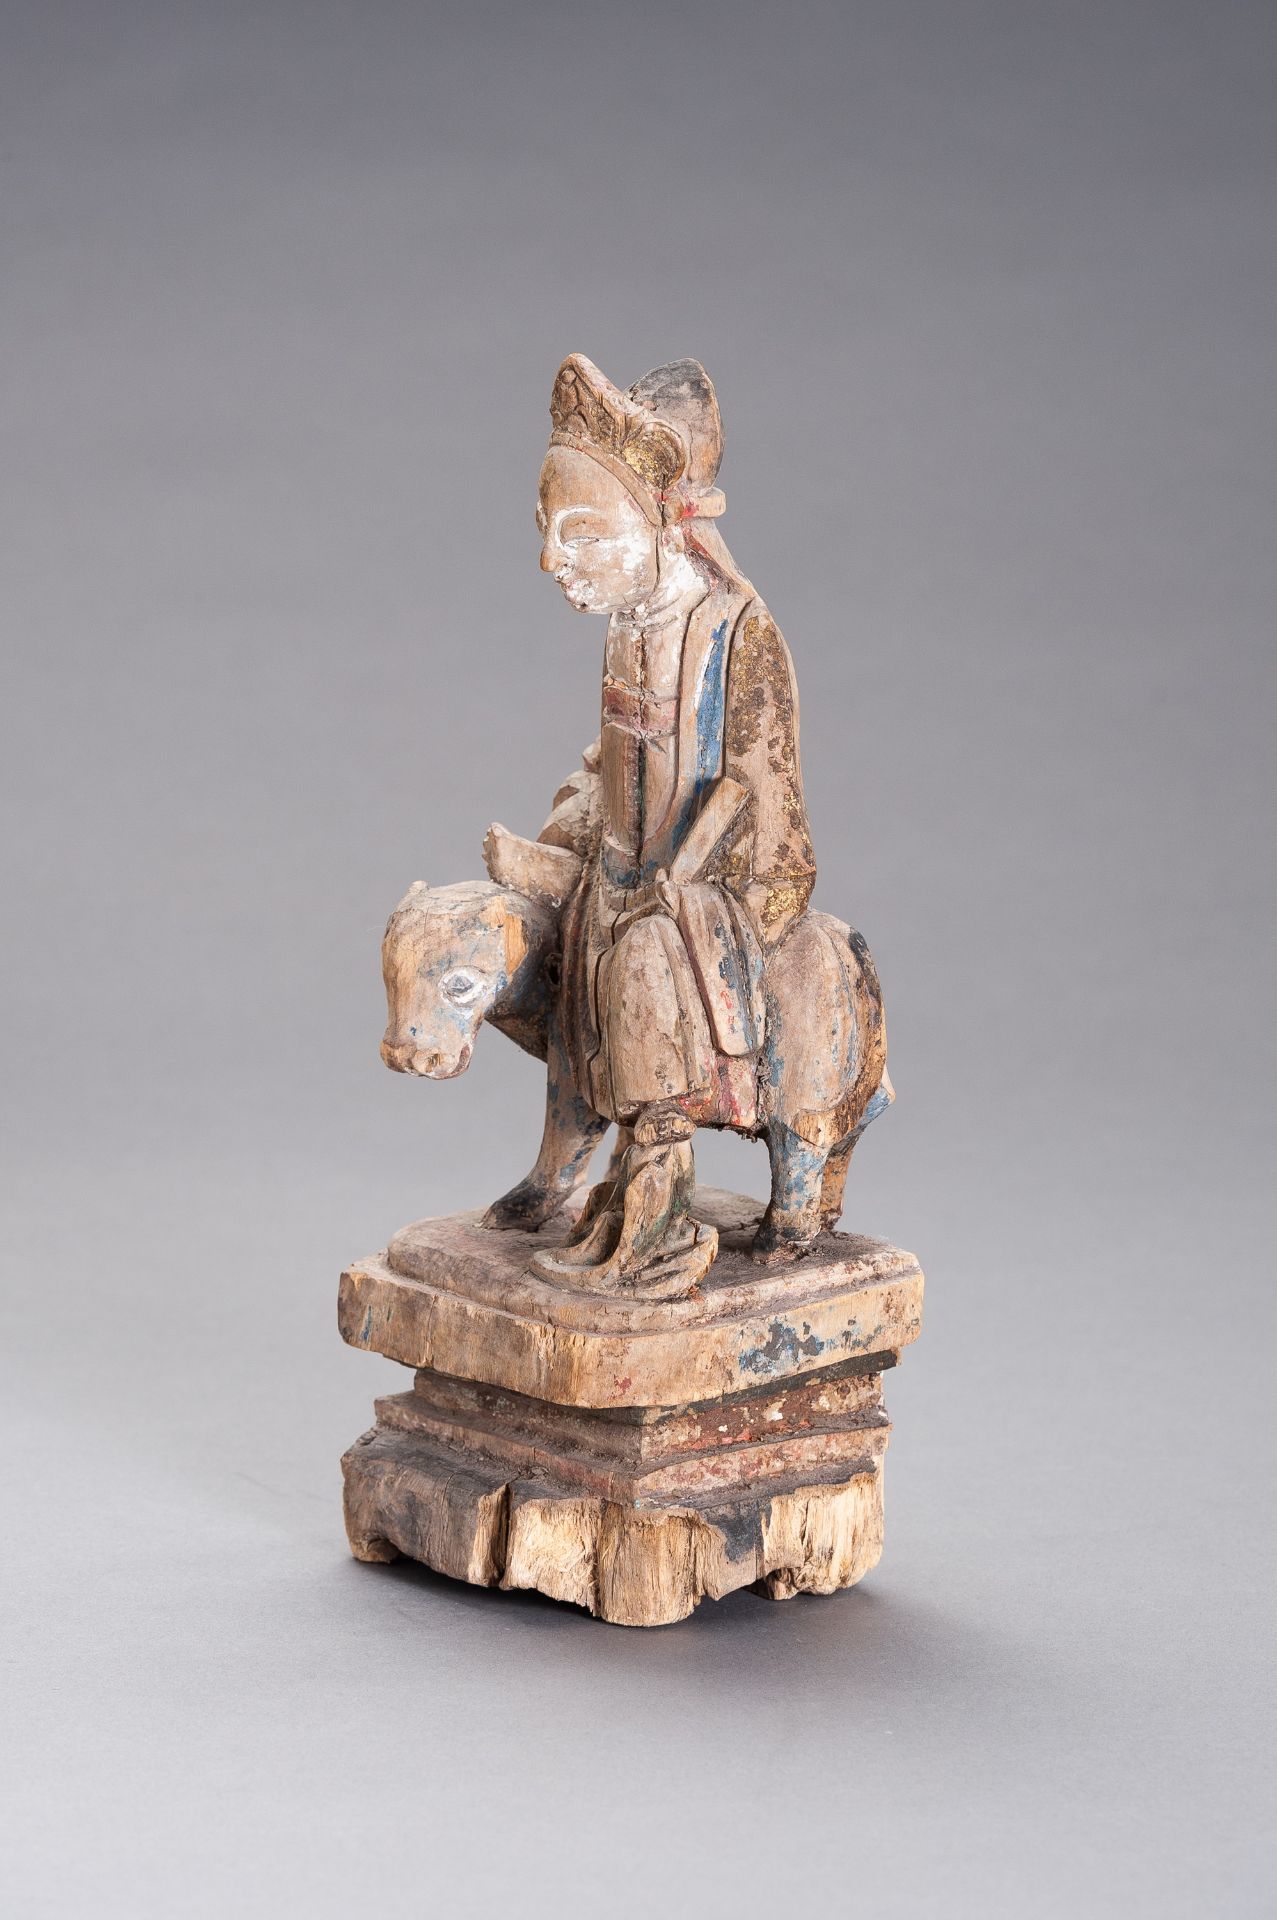 A WOODEN SCULPTURE OF LAOZI RIDING A WATER BUFFALO - Image 4 of 7